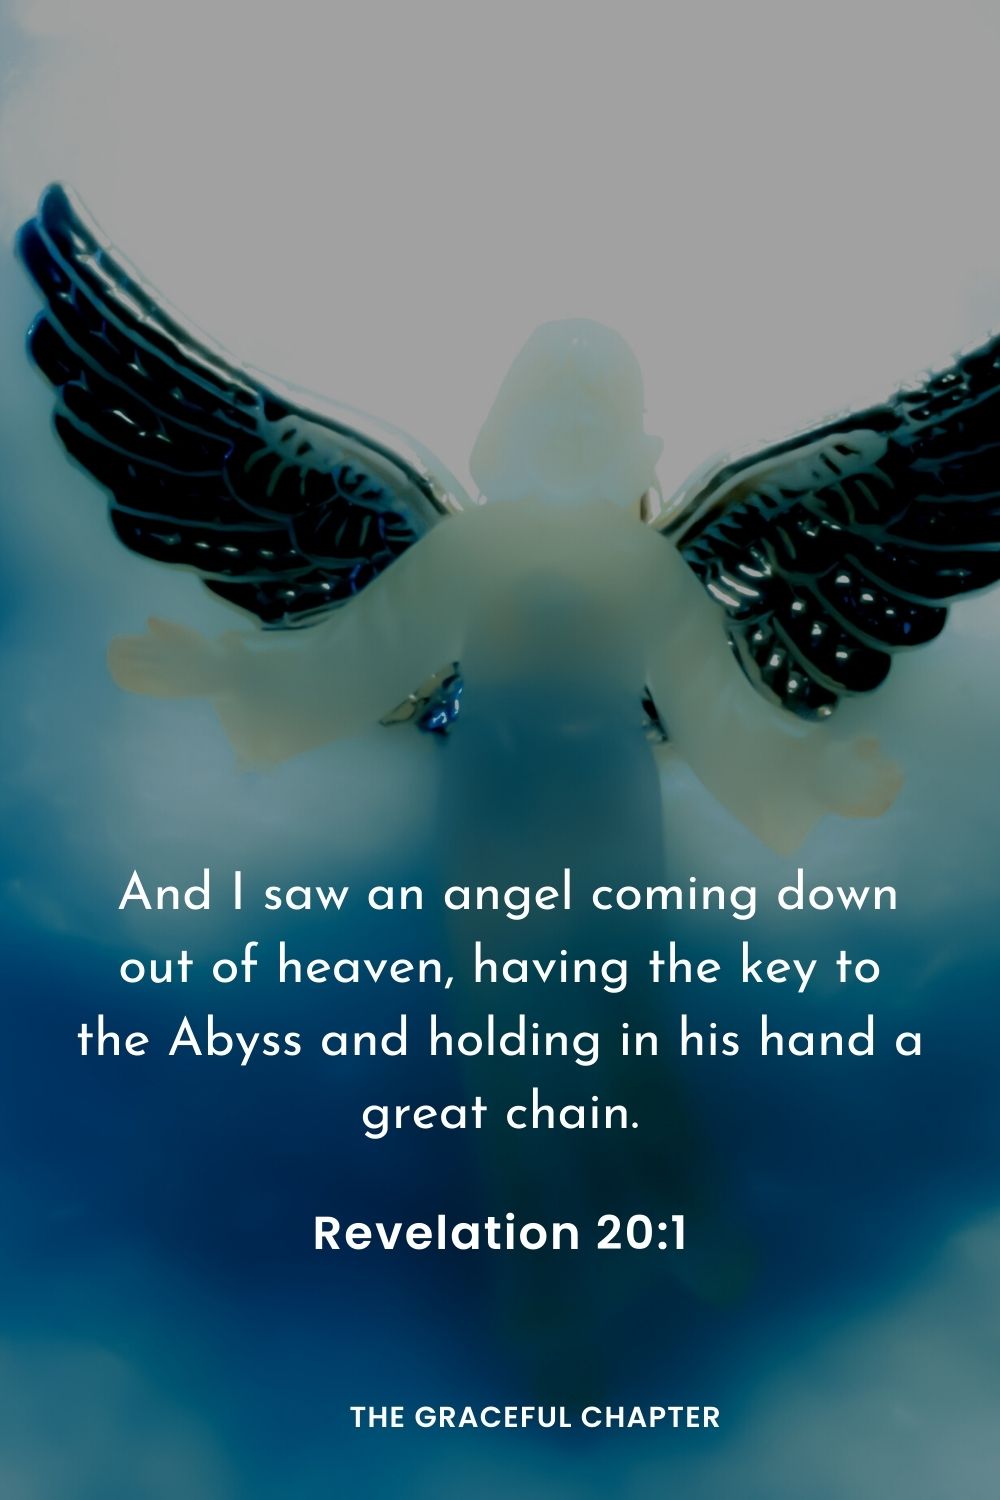  And I saw an angel coming down out of heaven, having the key to the Abyss and holding in his hand a great chain.